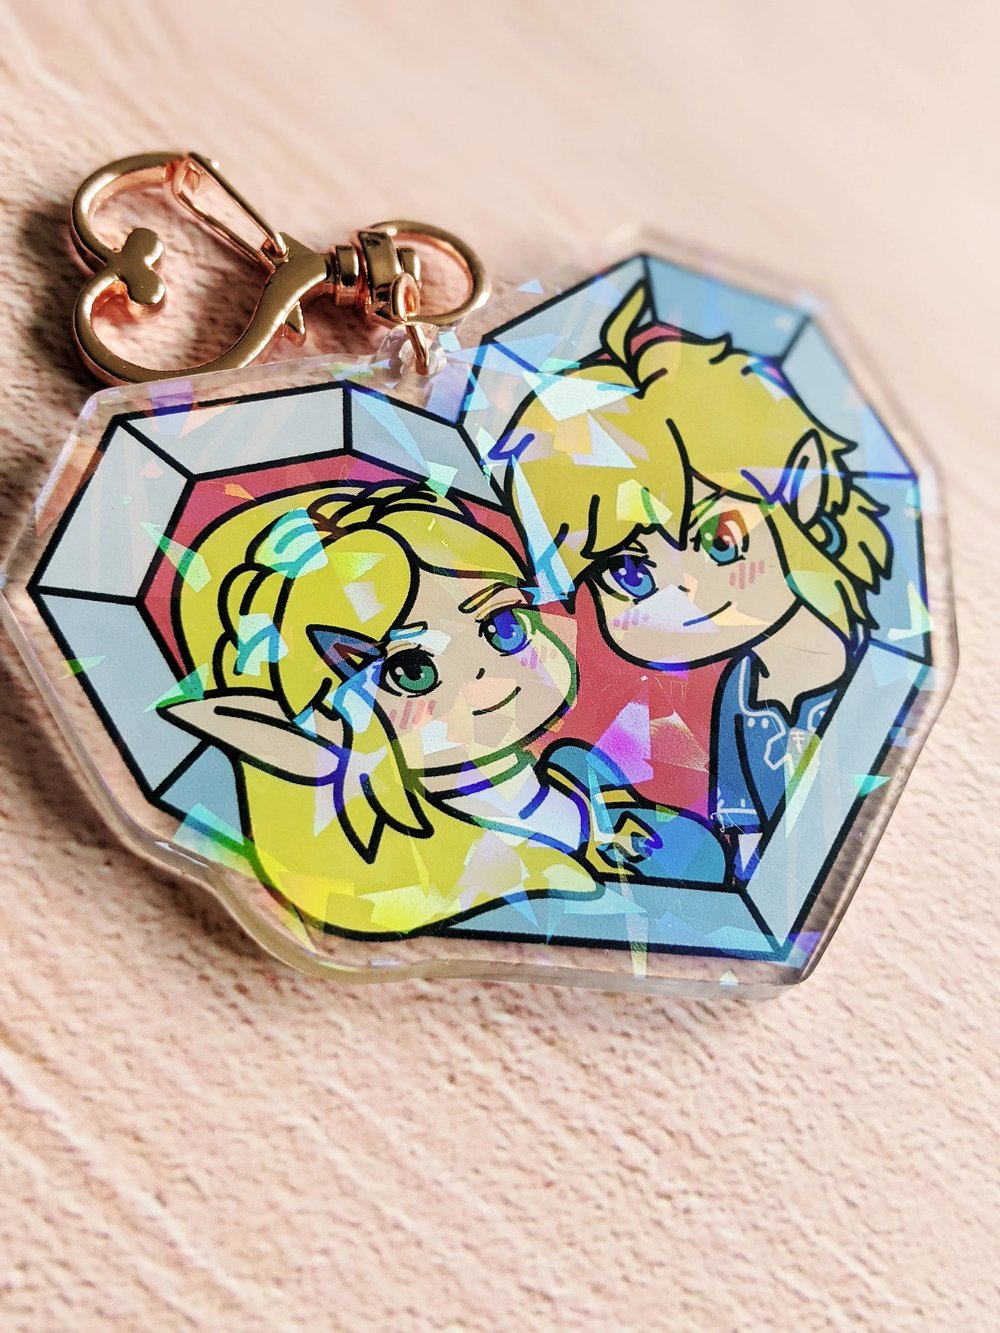 Image of LoZ Heart Container Keychain